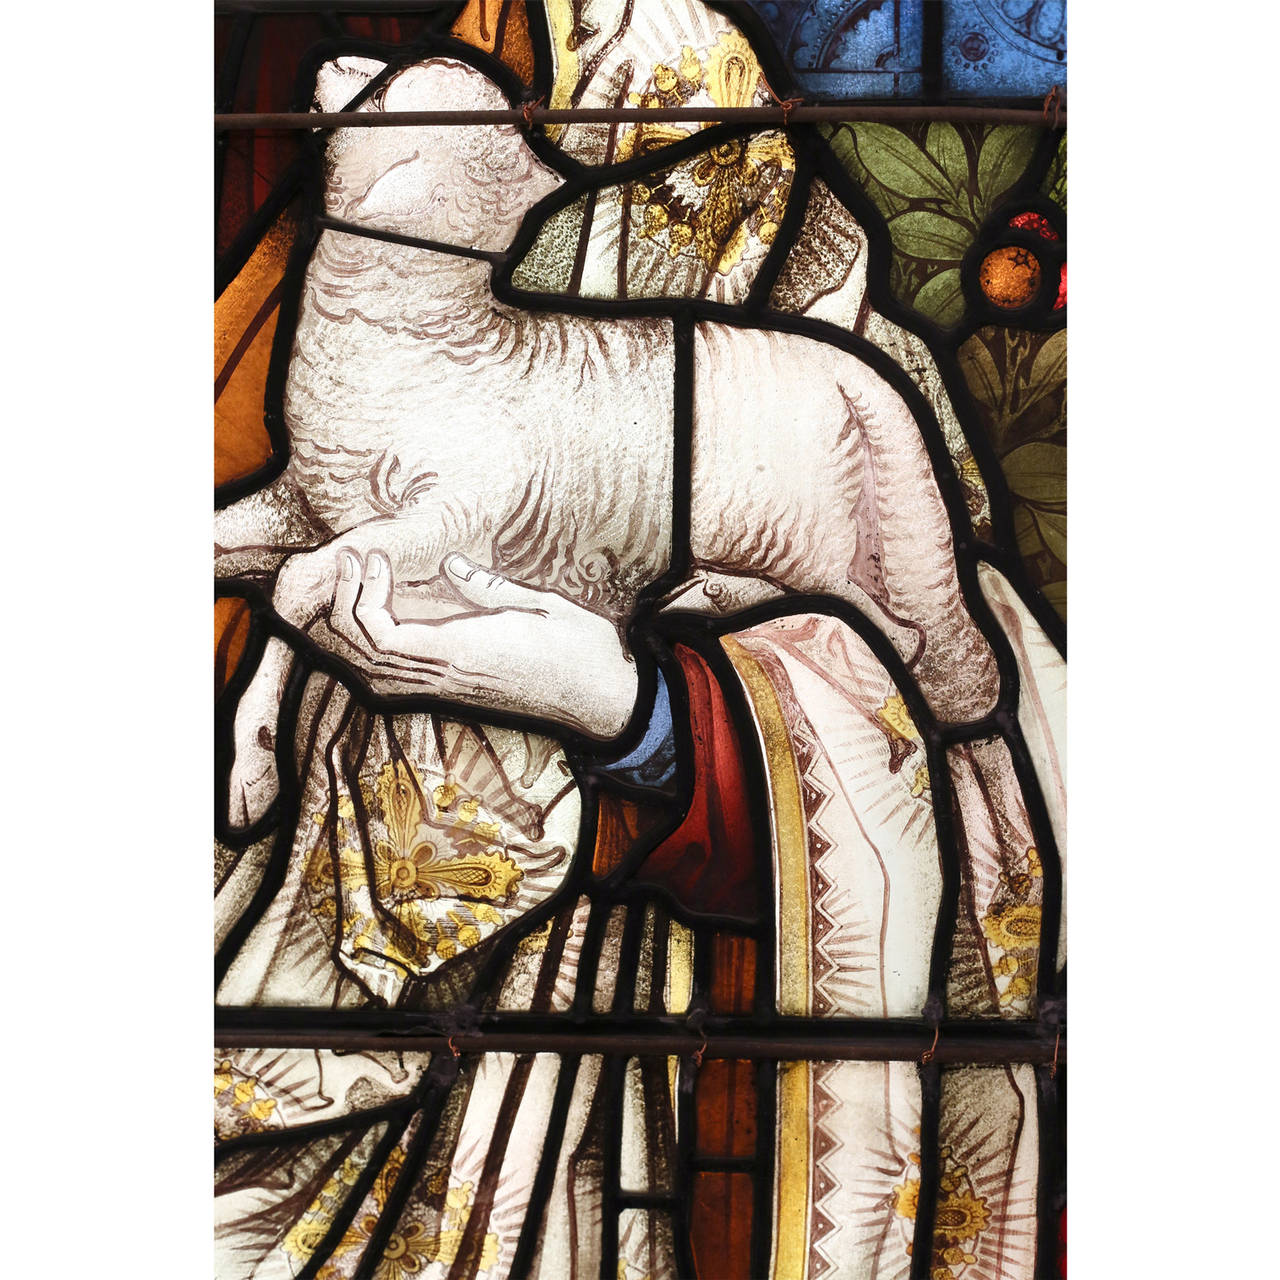 A stained and painted glass window depicting the Good Shepherd, circa 1890, by Carl Armquist of Shrigley & Hunt, the leaded glass panel depicting the robed Christ figure standing against a foliate back-drop and holding the Lamb.

Available to view